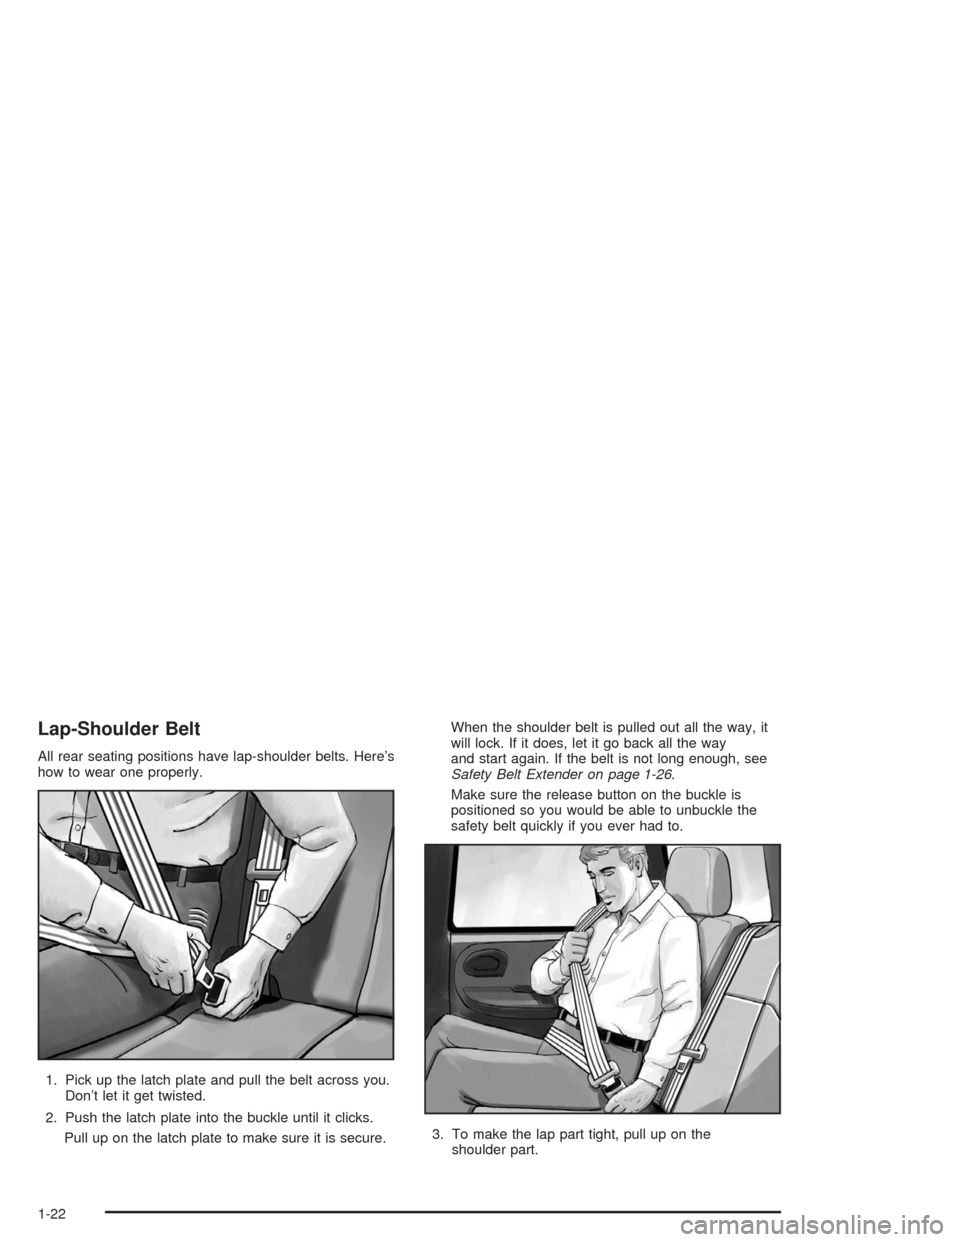 Oldsmobile Bravada 2004  Owners Manuals Lap-Shoulder Belt
All rear seating positions have lap-shoulder belts. Here’s
how to wear one properly.
1. Pick up the latch plate and pull the belt across you.
Don’t let it get twisted.
2. Push th